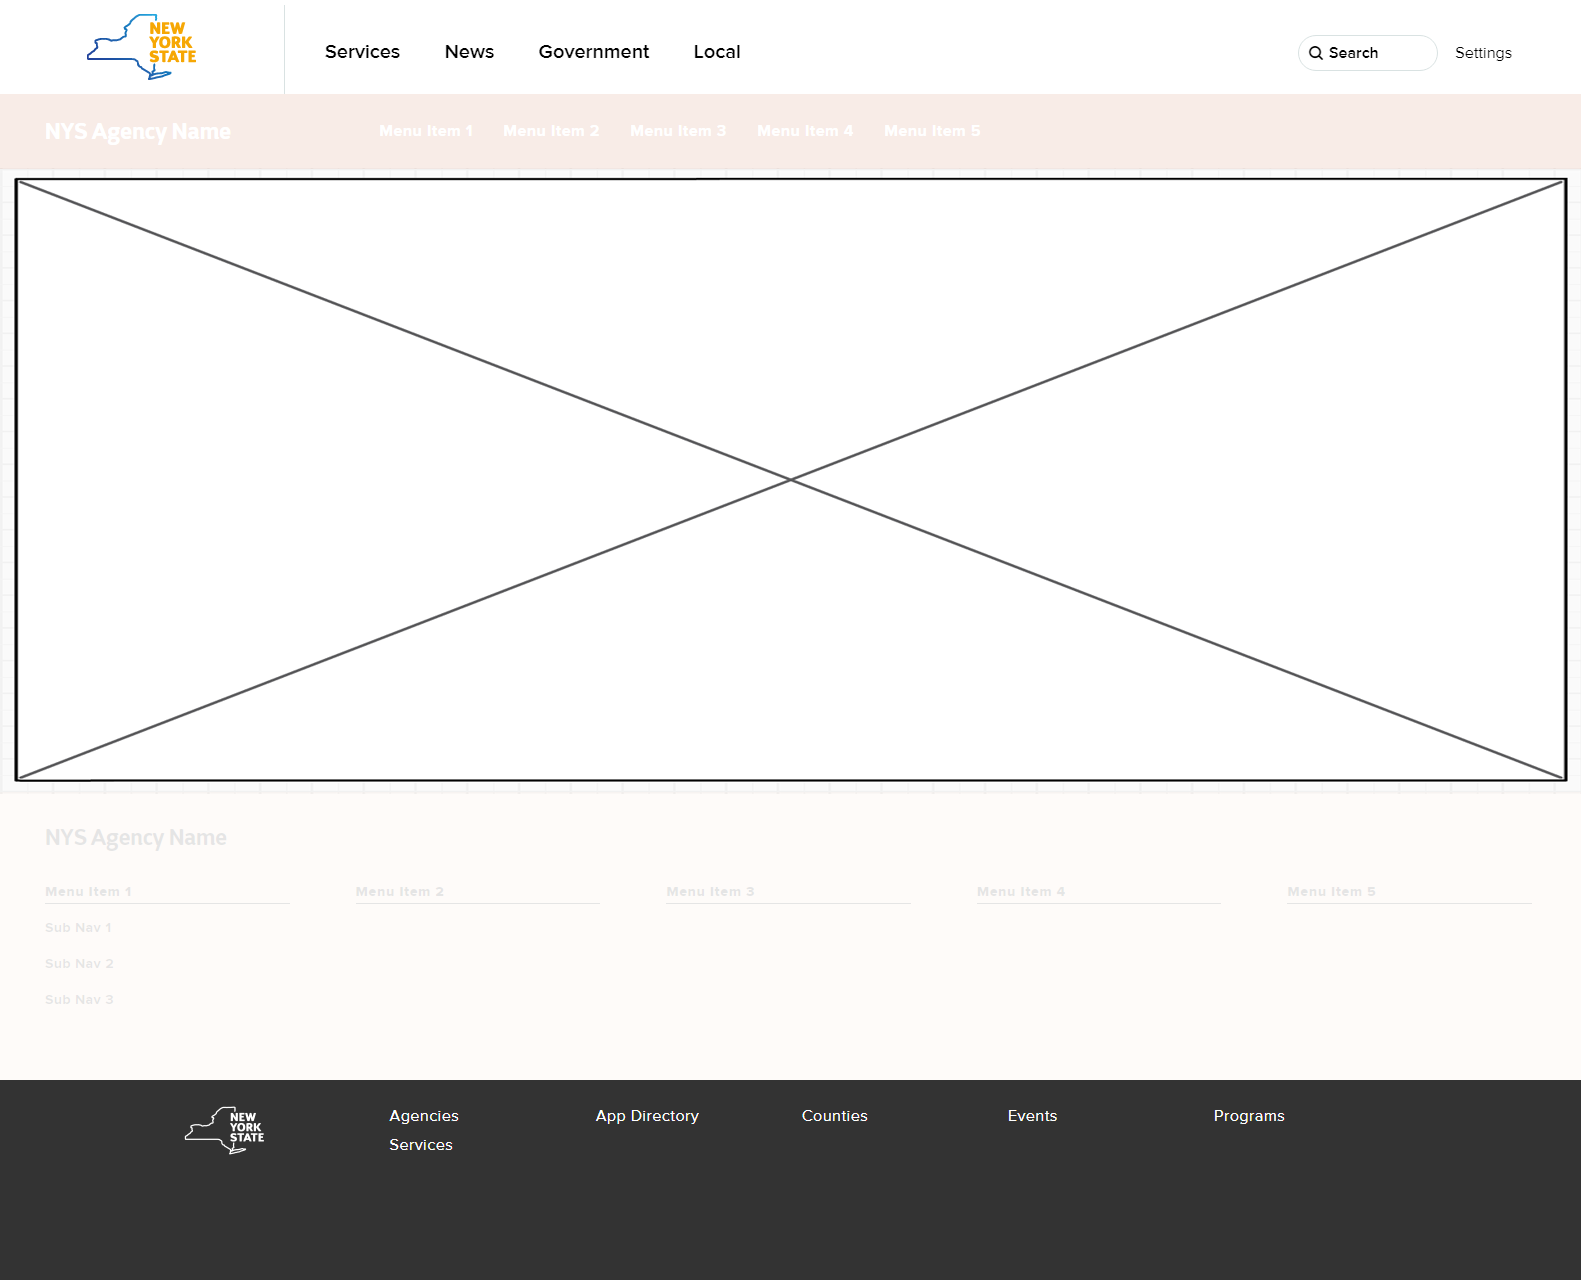 Wireframe showing uNav header and footer